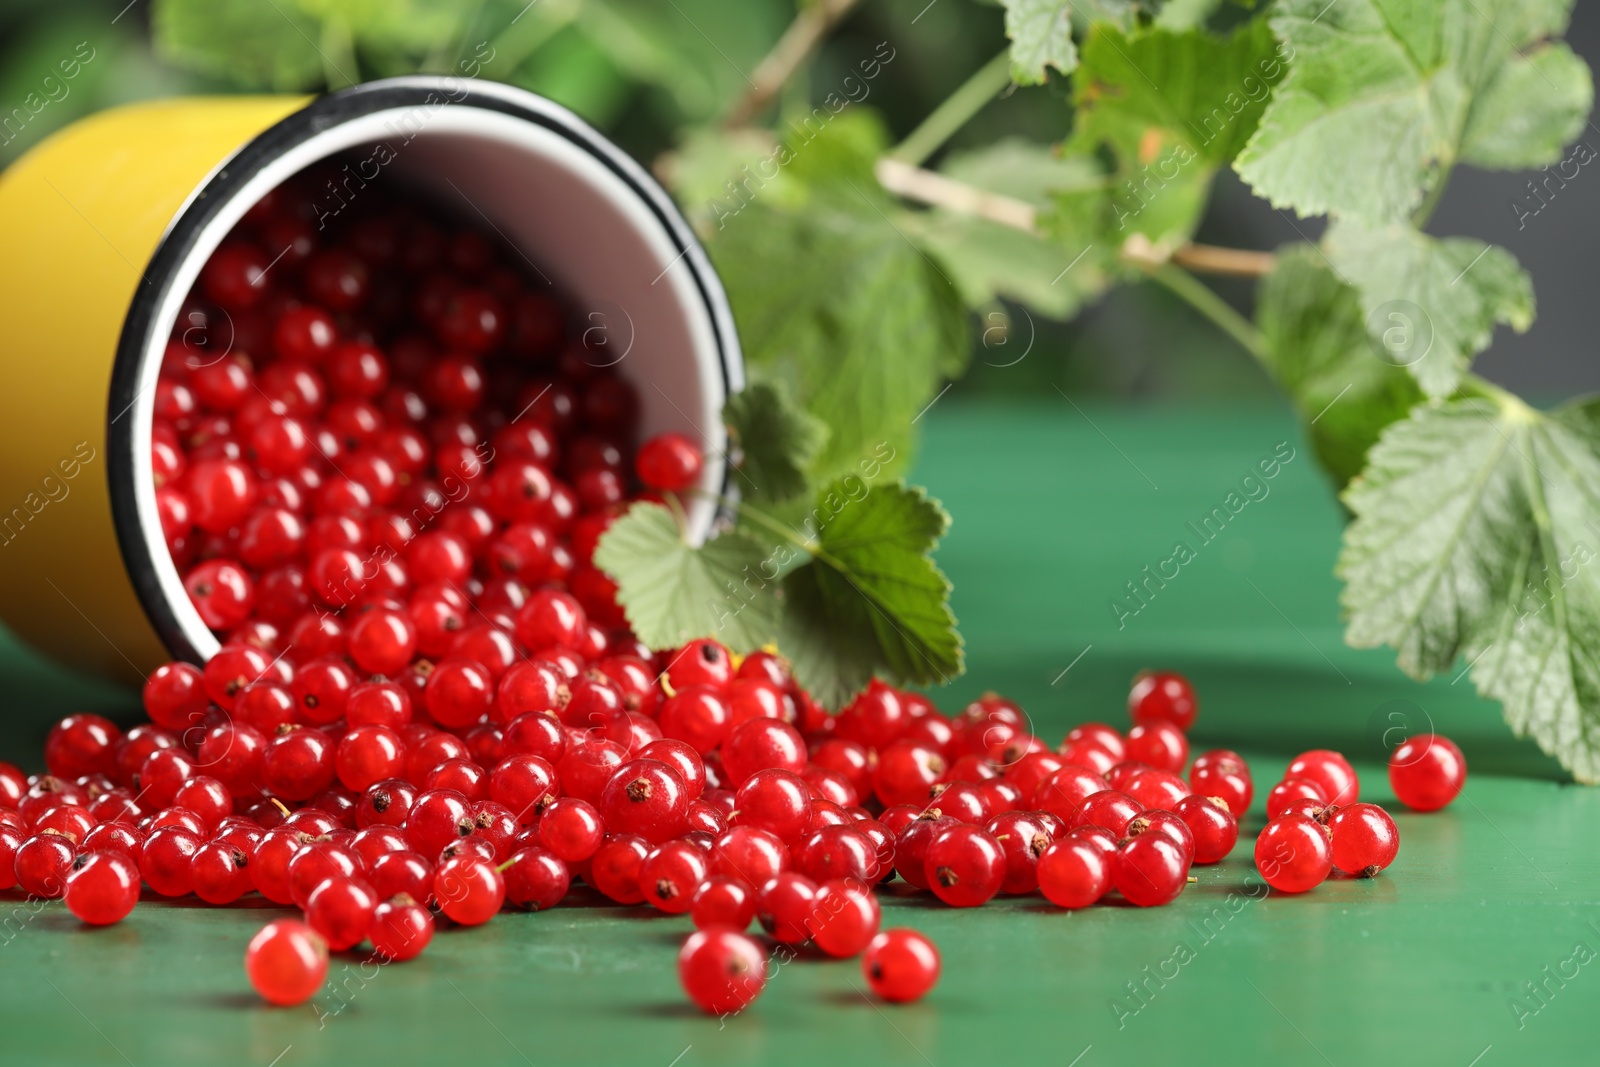 Photo of Many ripe red currants, mug and leaves on green wooden table